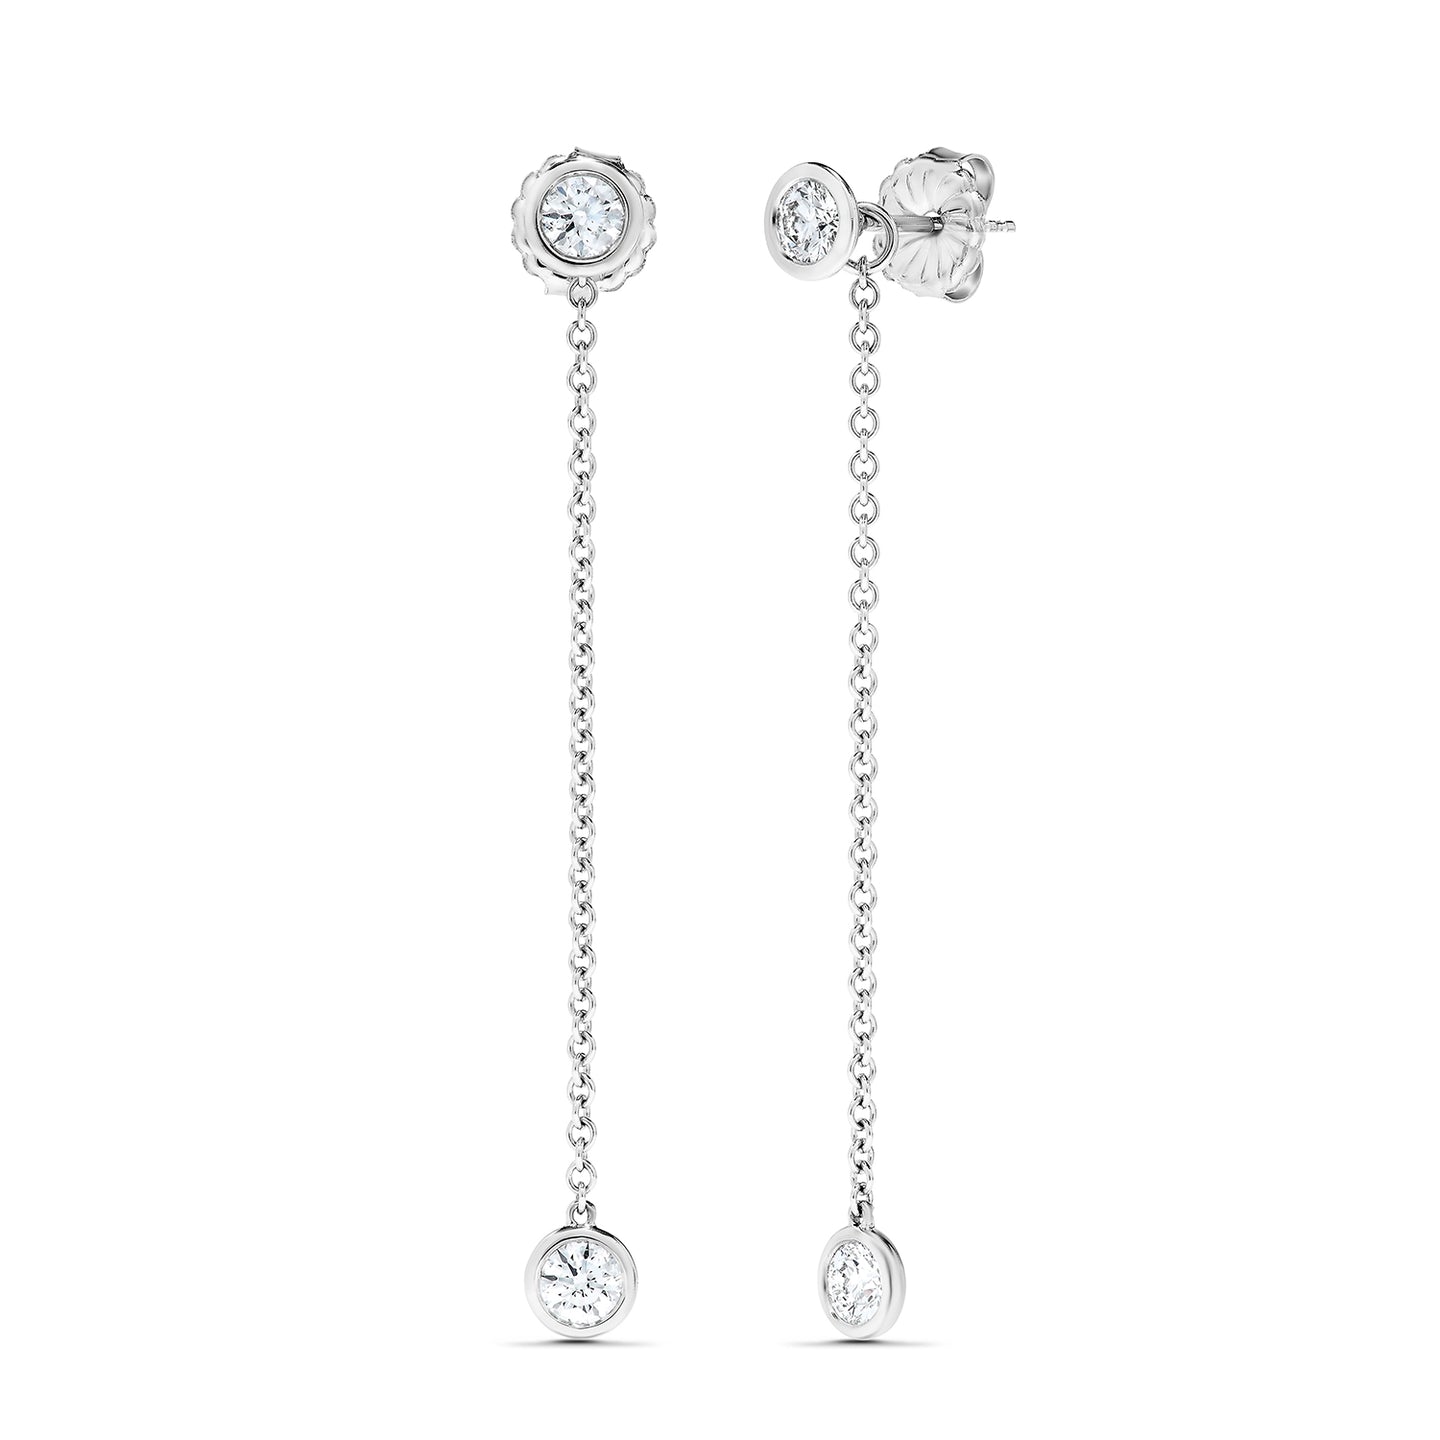 Sabel Collection 18K White Gold Chain Diamond Drop Earrings